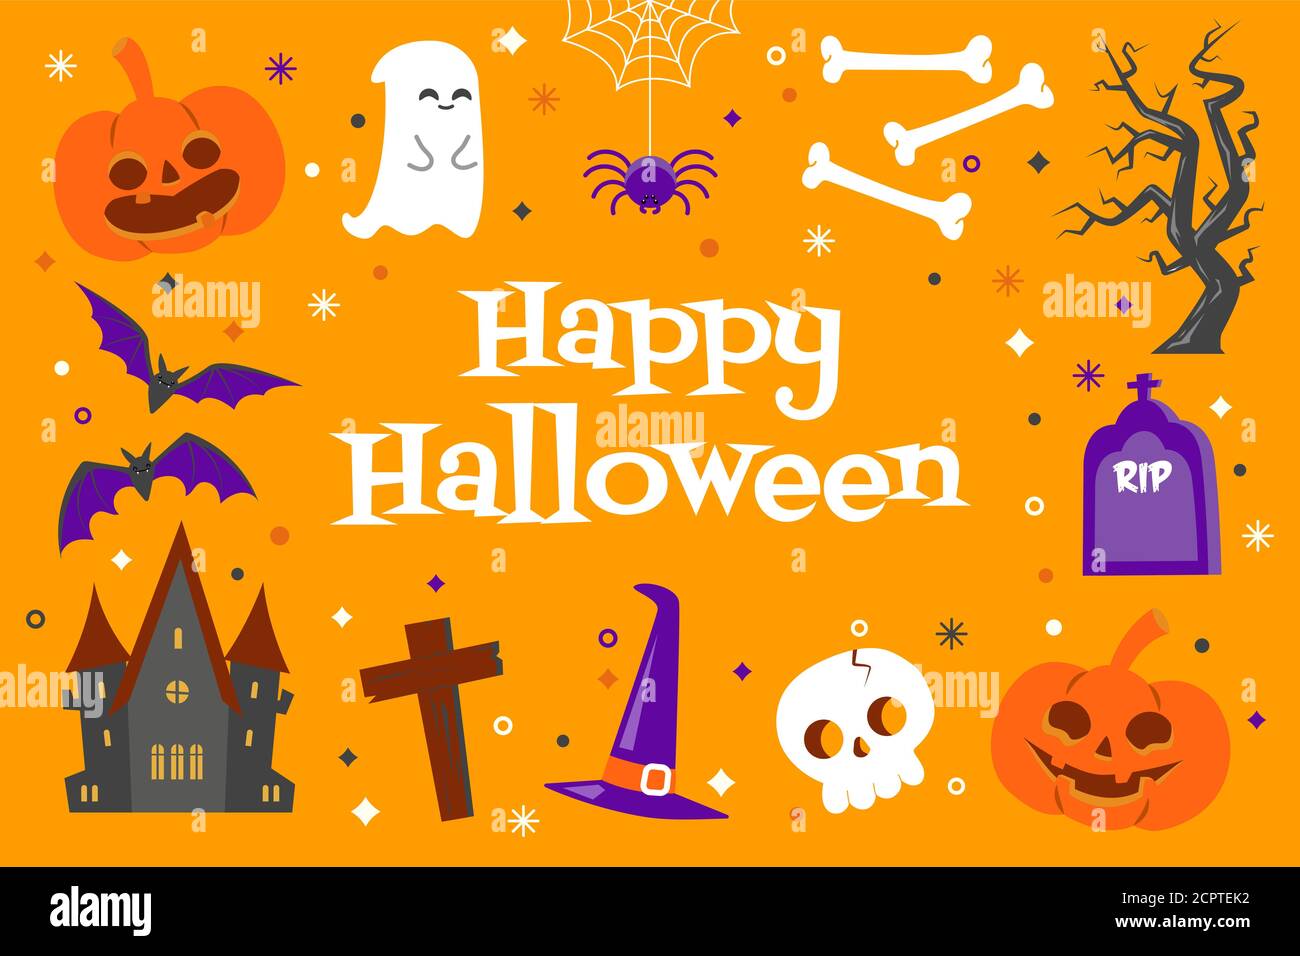 Happy Halloween background with cute objects in flat design on a yellow background Stock Vector